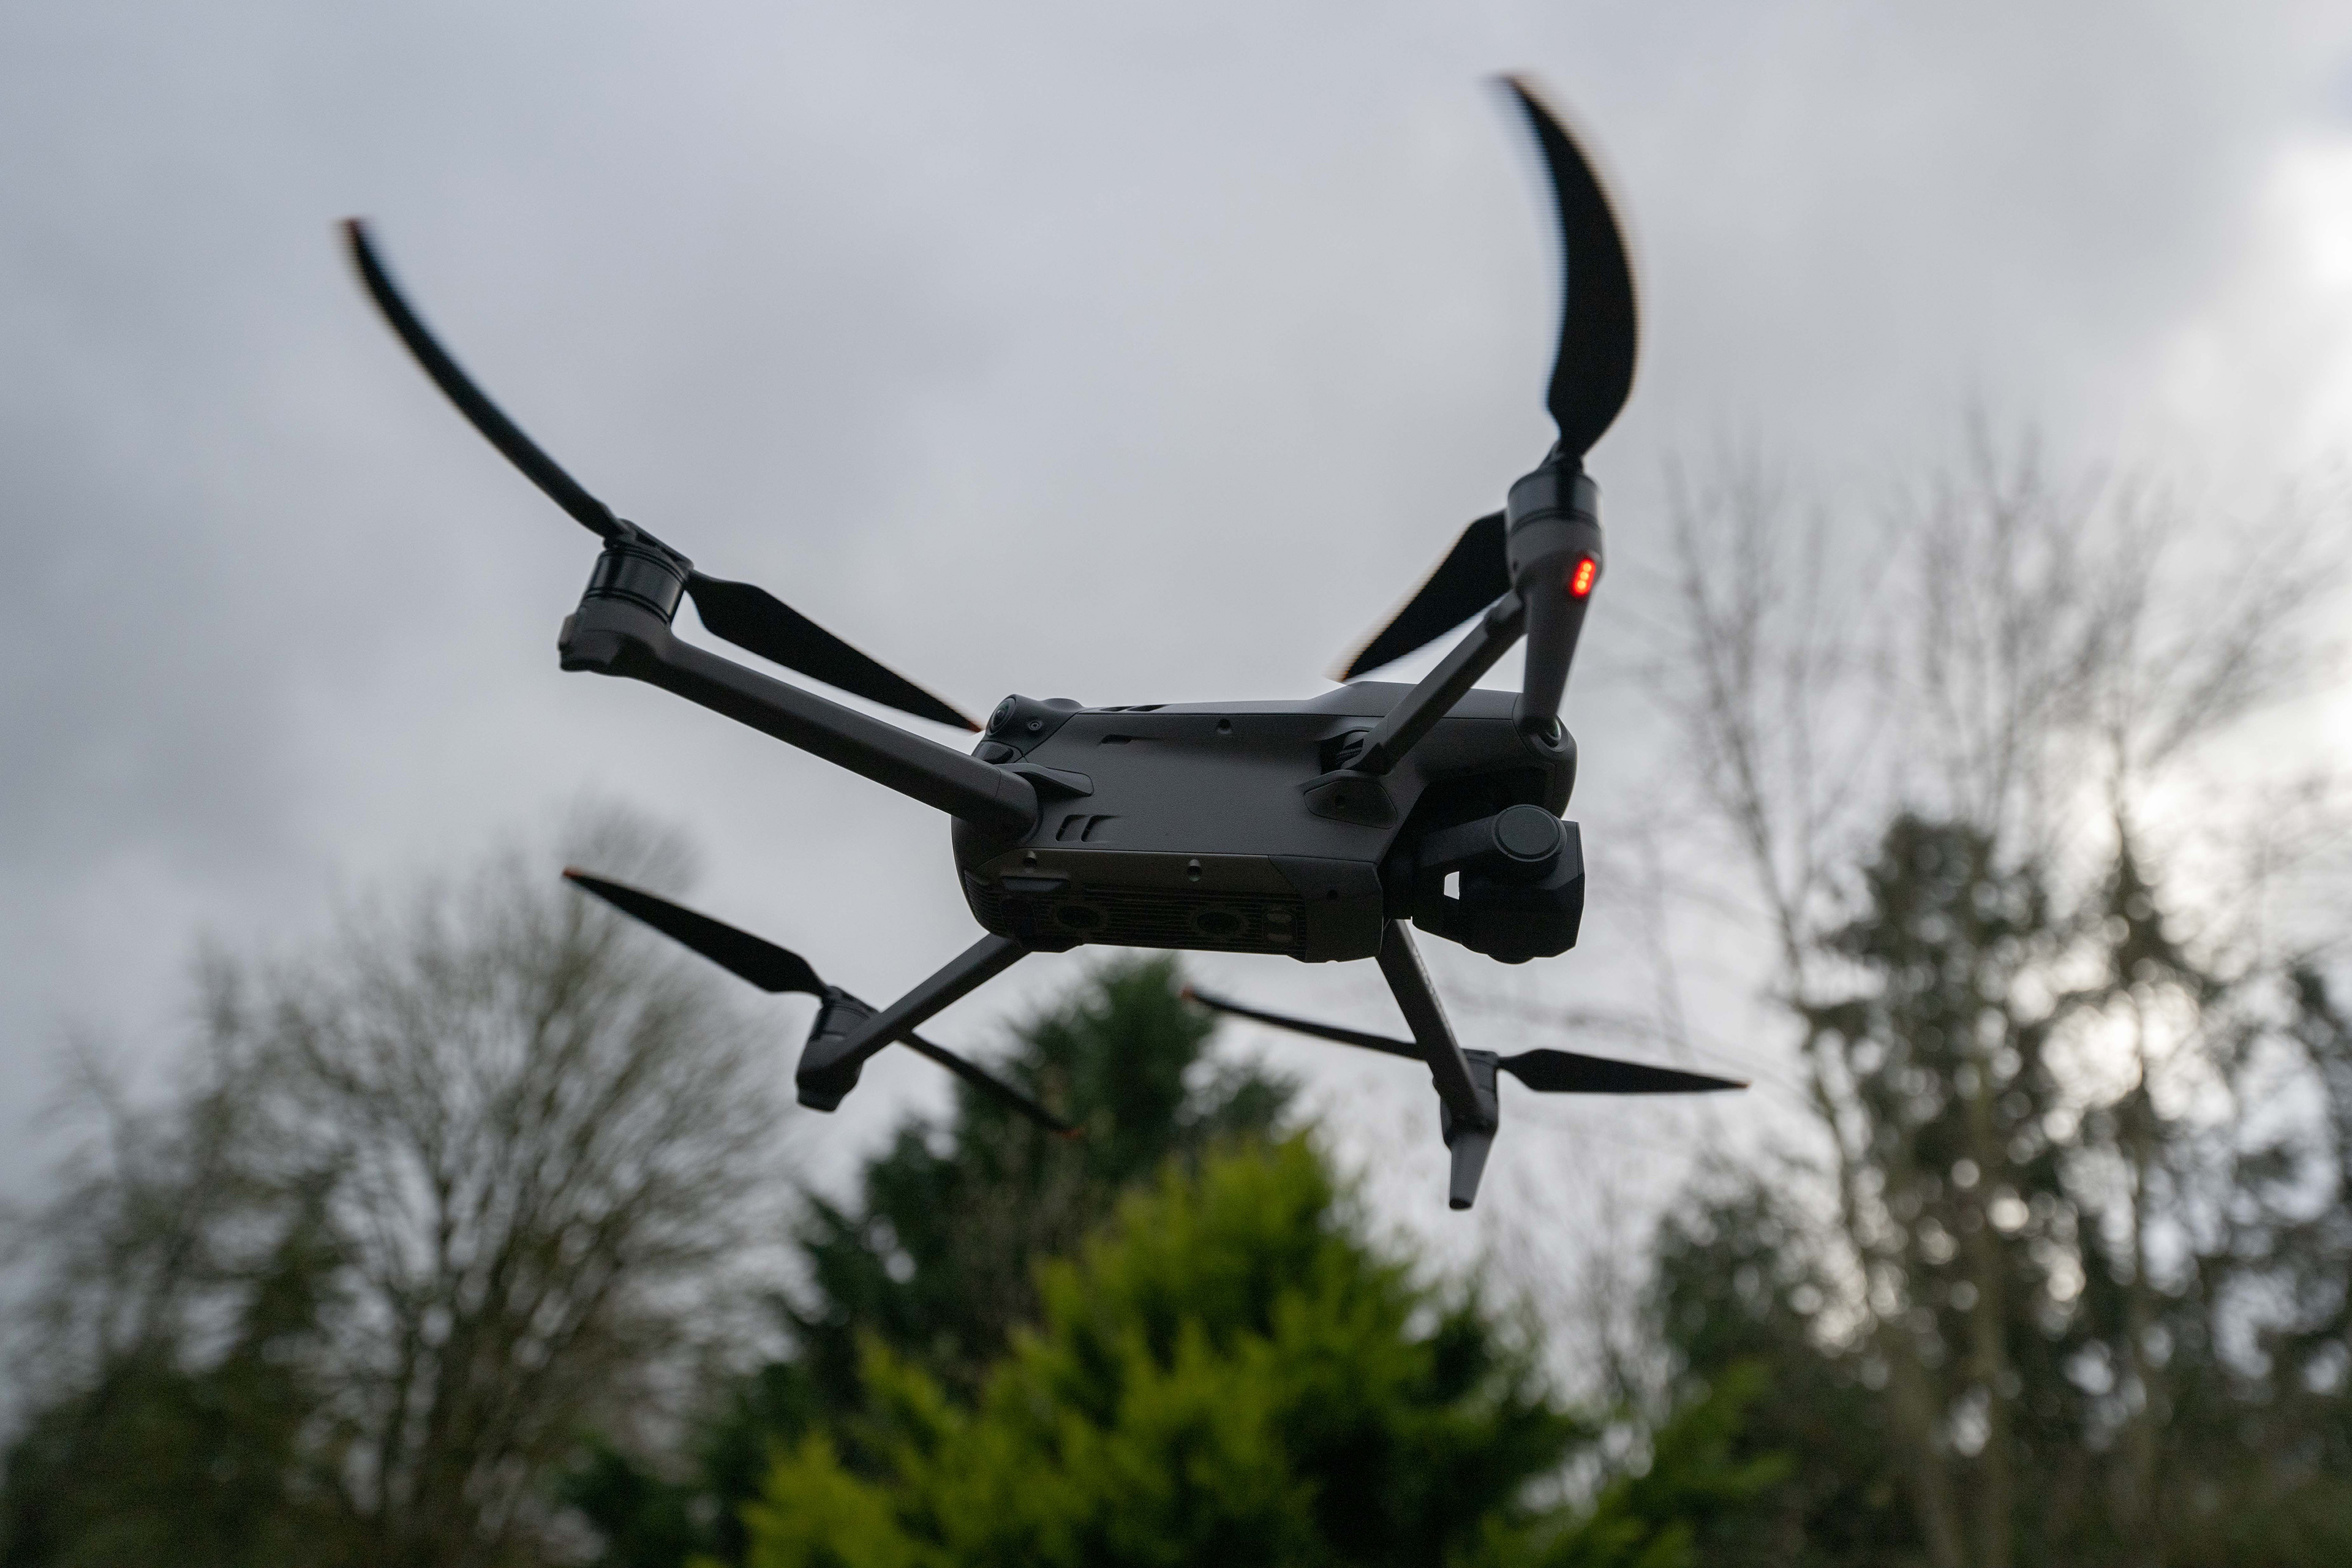 DJI Mavic 3 Classic review: the affordable king of the skies